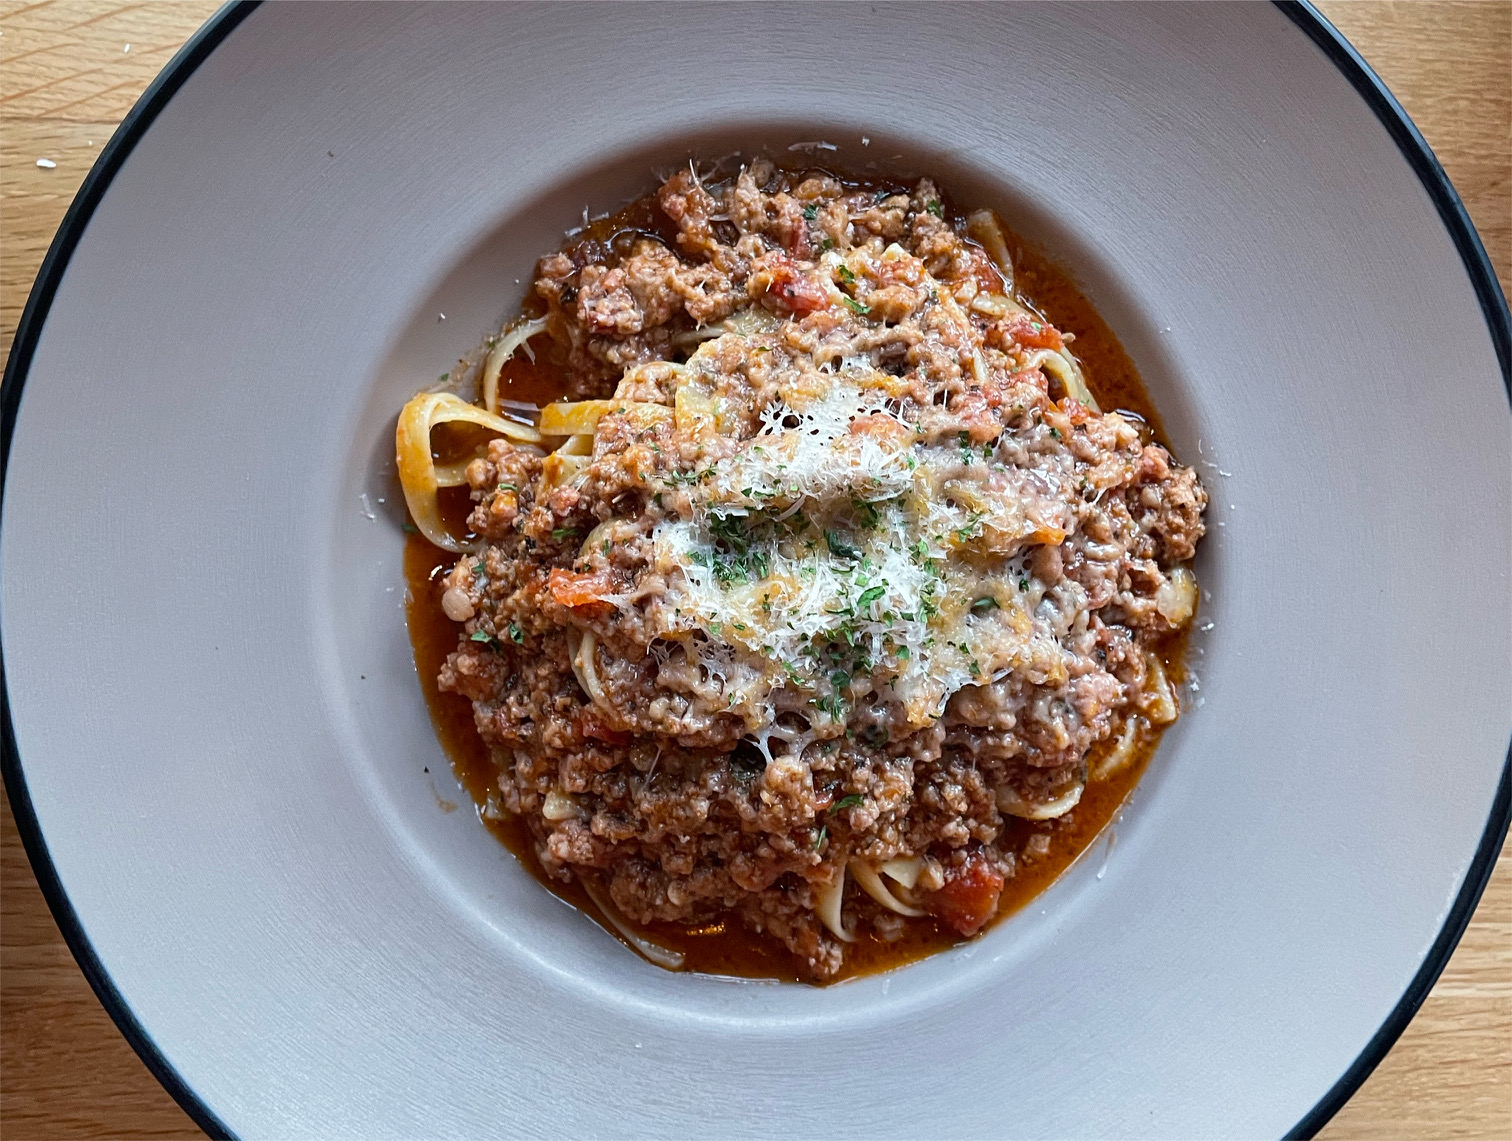 An overhead photo shows a gray bowl with the center full of a bolognese pasta with a big outer rim on the plate. Photo by Alyssa Buckley.